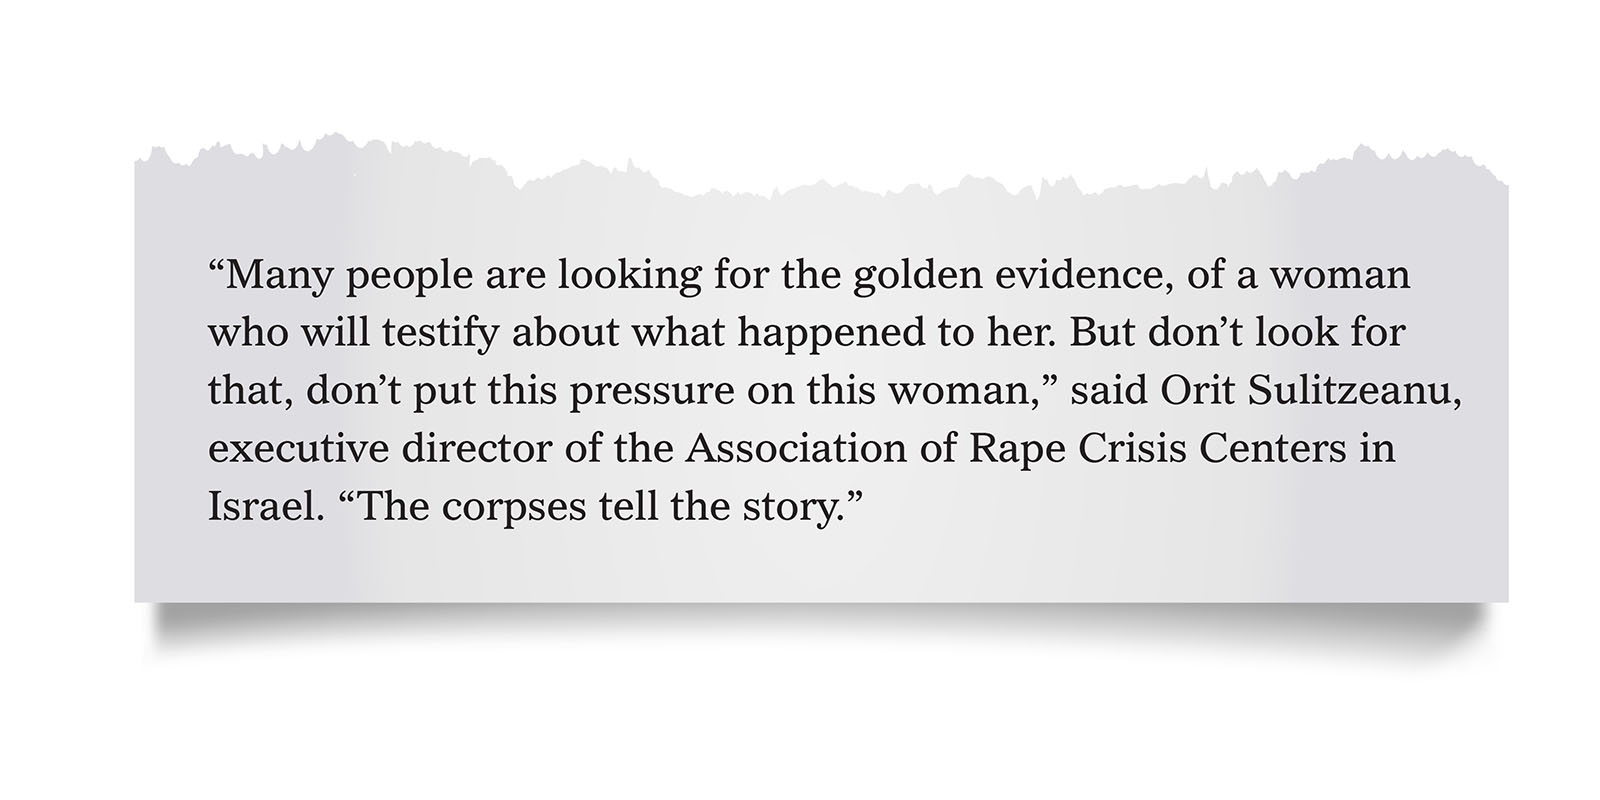 Pull quote:
“Many people are looking for the golden evidence, of a woman who will testify about what happened to her. But don’t look for that, don’t put this pressure on this woman,” said Orit Sulitzeanu, executive director of the Association of Rape Crisis Centers in Israel. “The corpses tell the story.”